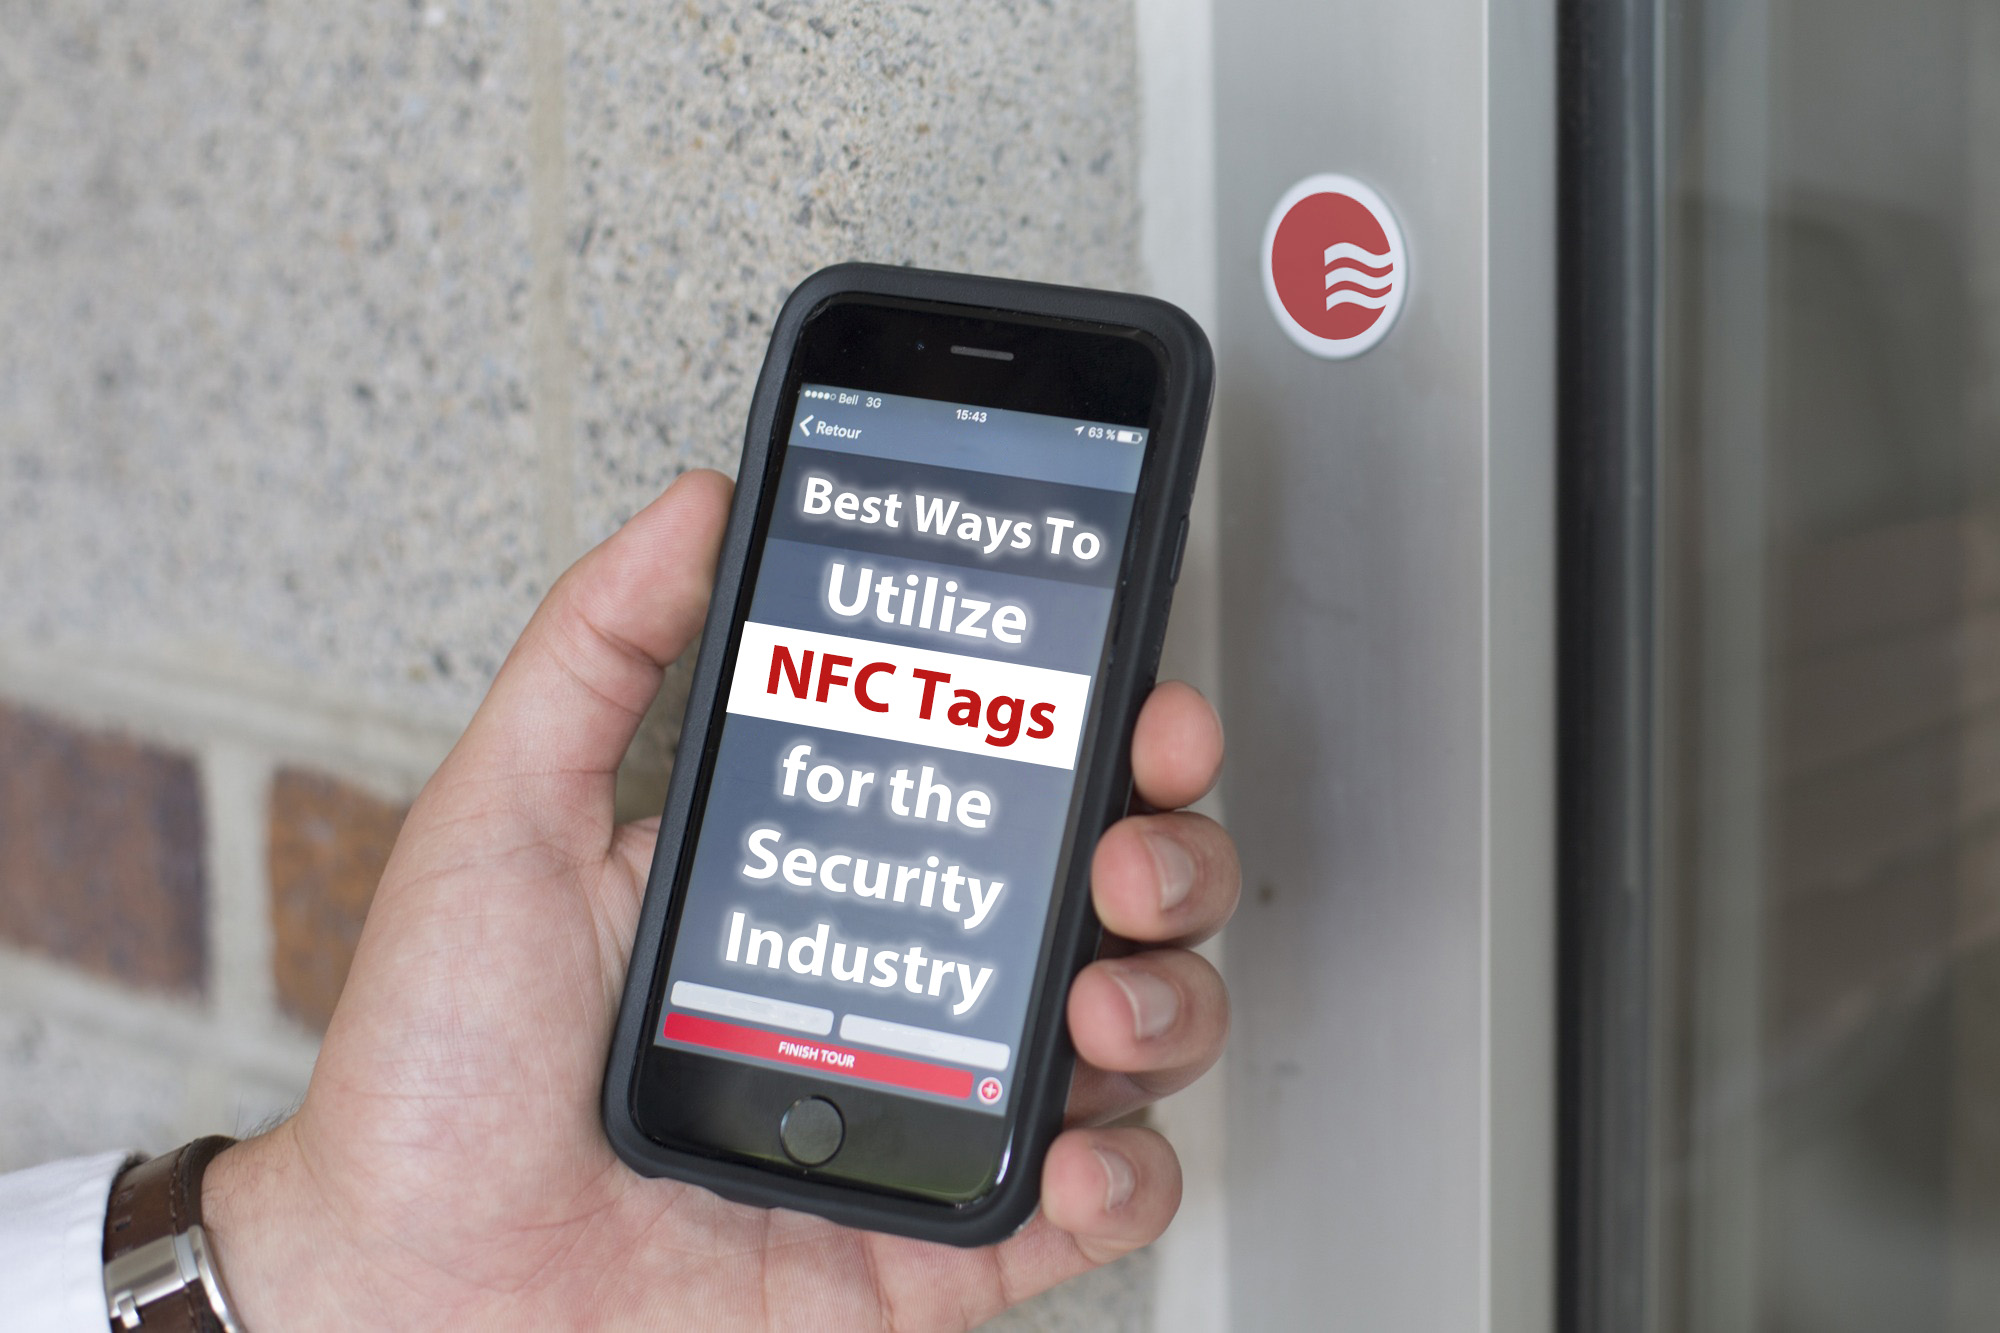 Best Ways to Utilize NFC Tag Technology for the Security Industry